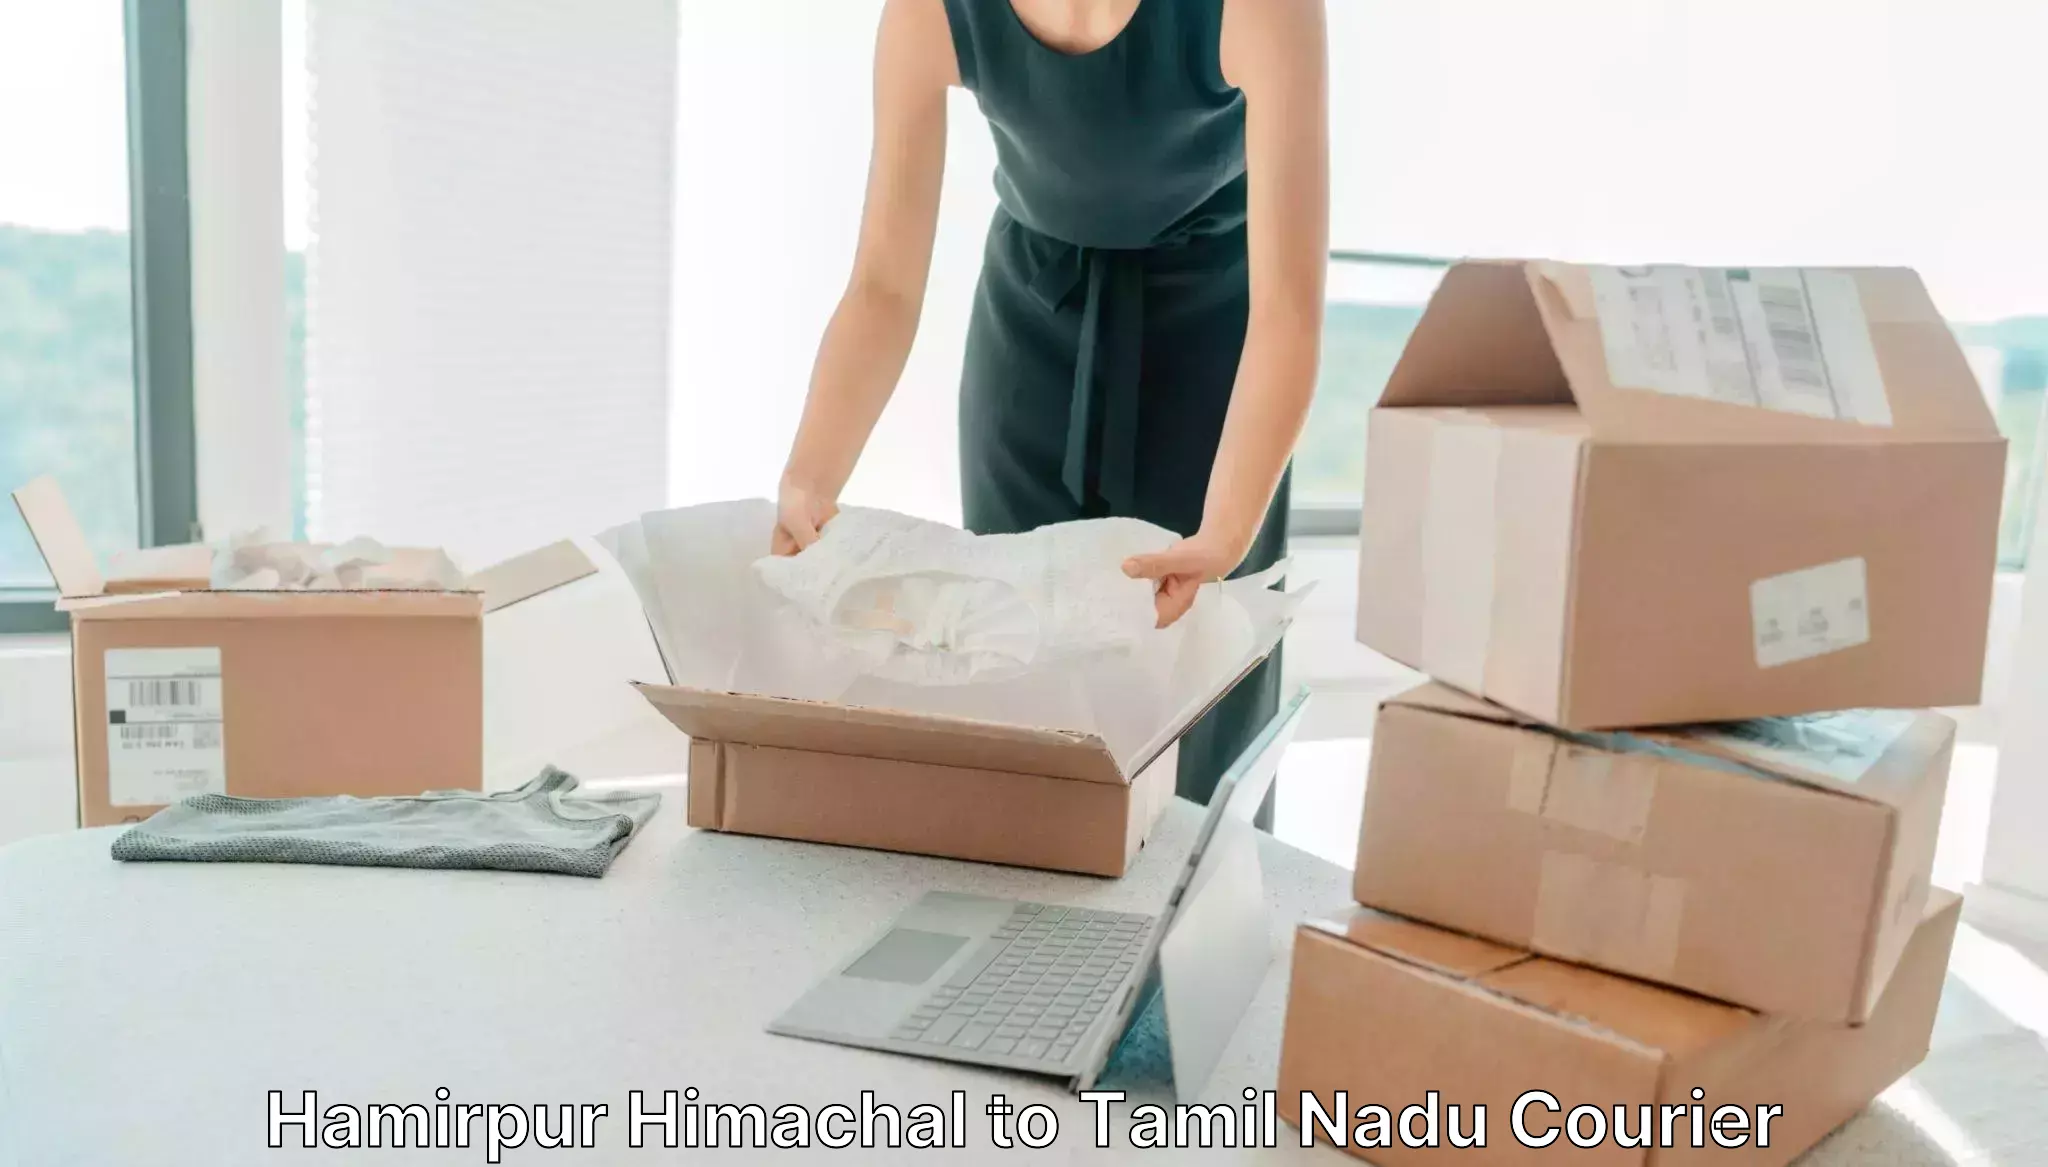 Personalized courier experiences Hamirpur Himachal to Sivakasi